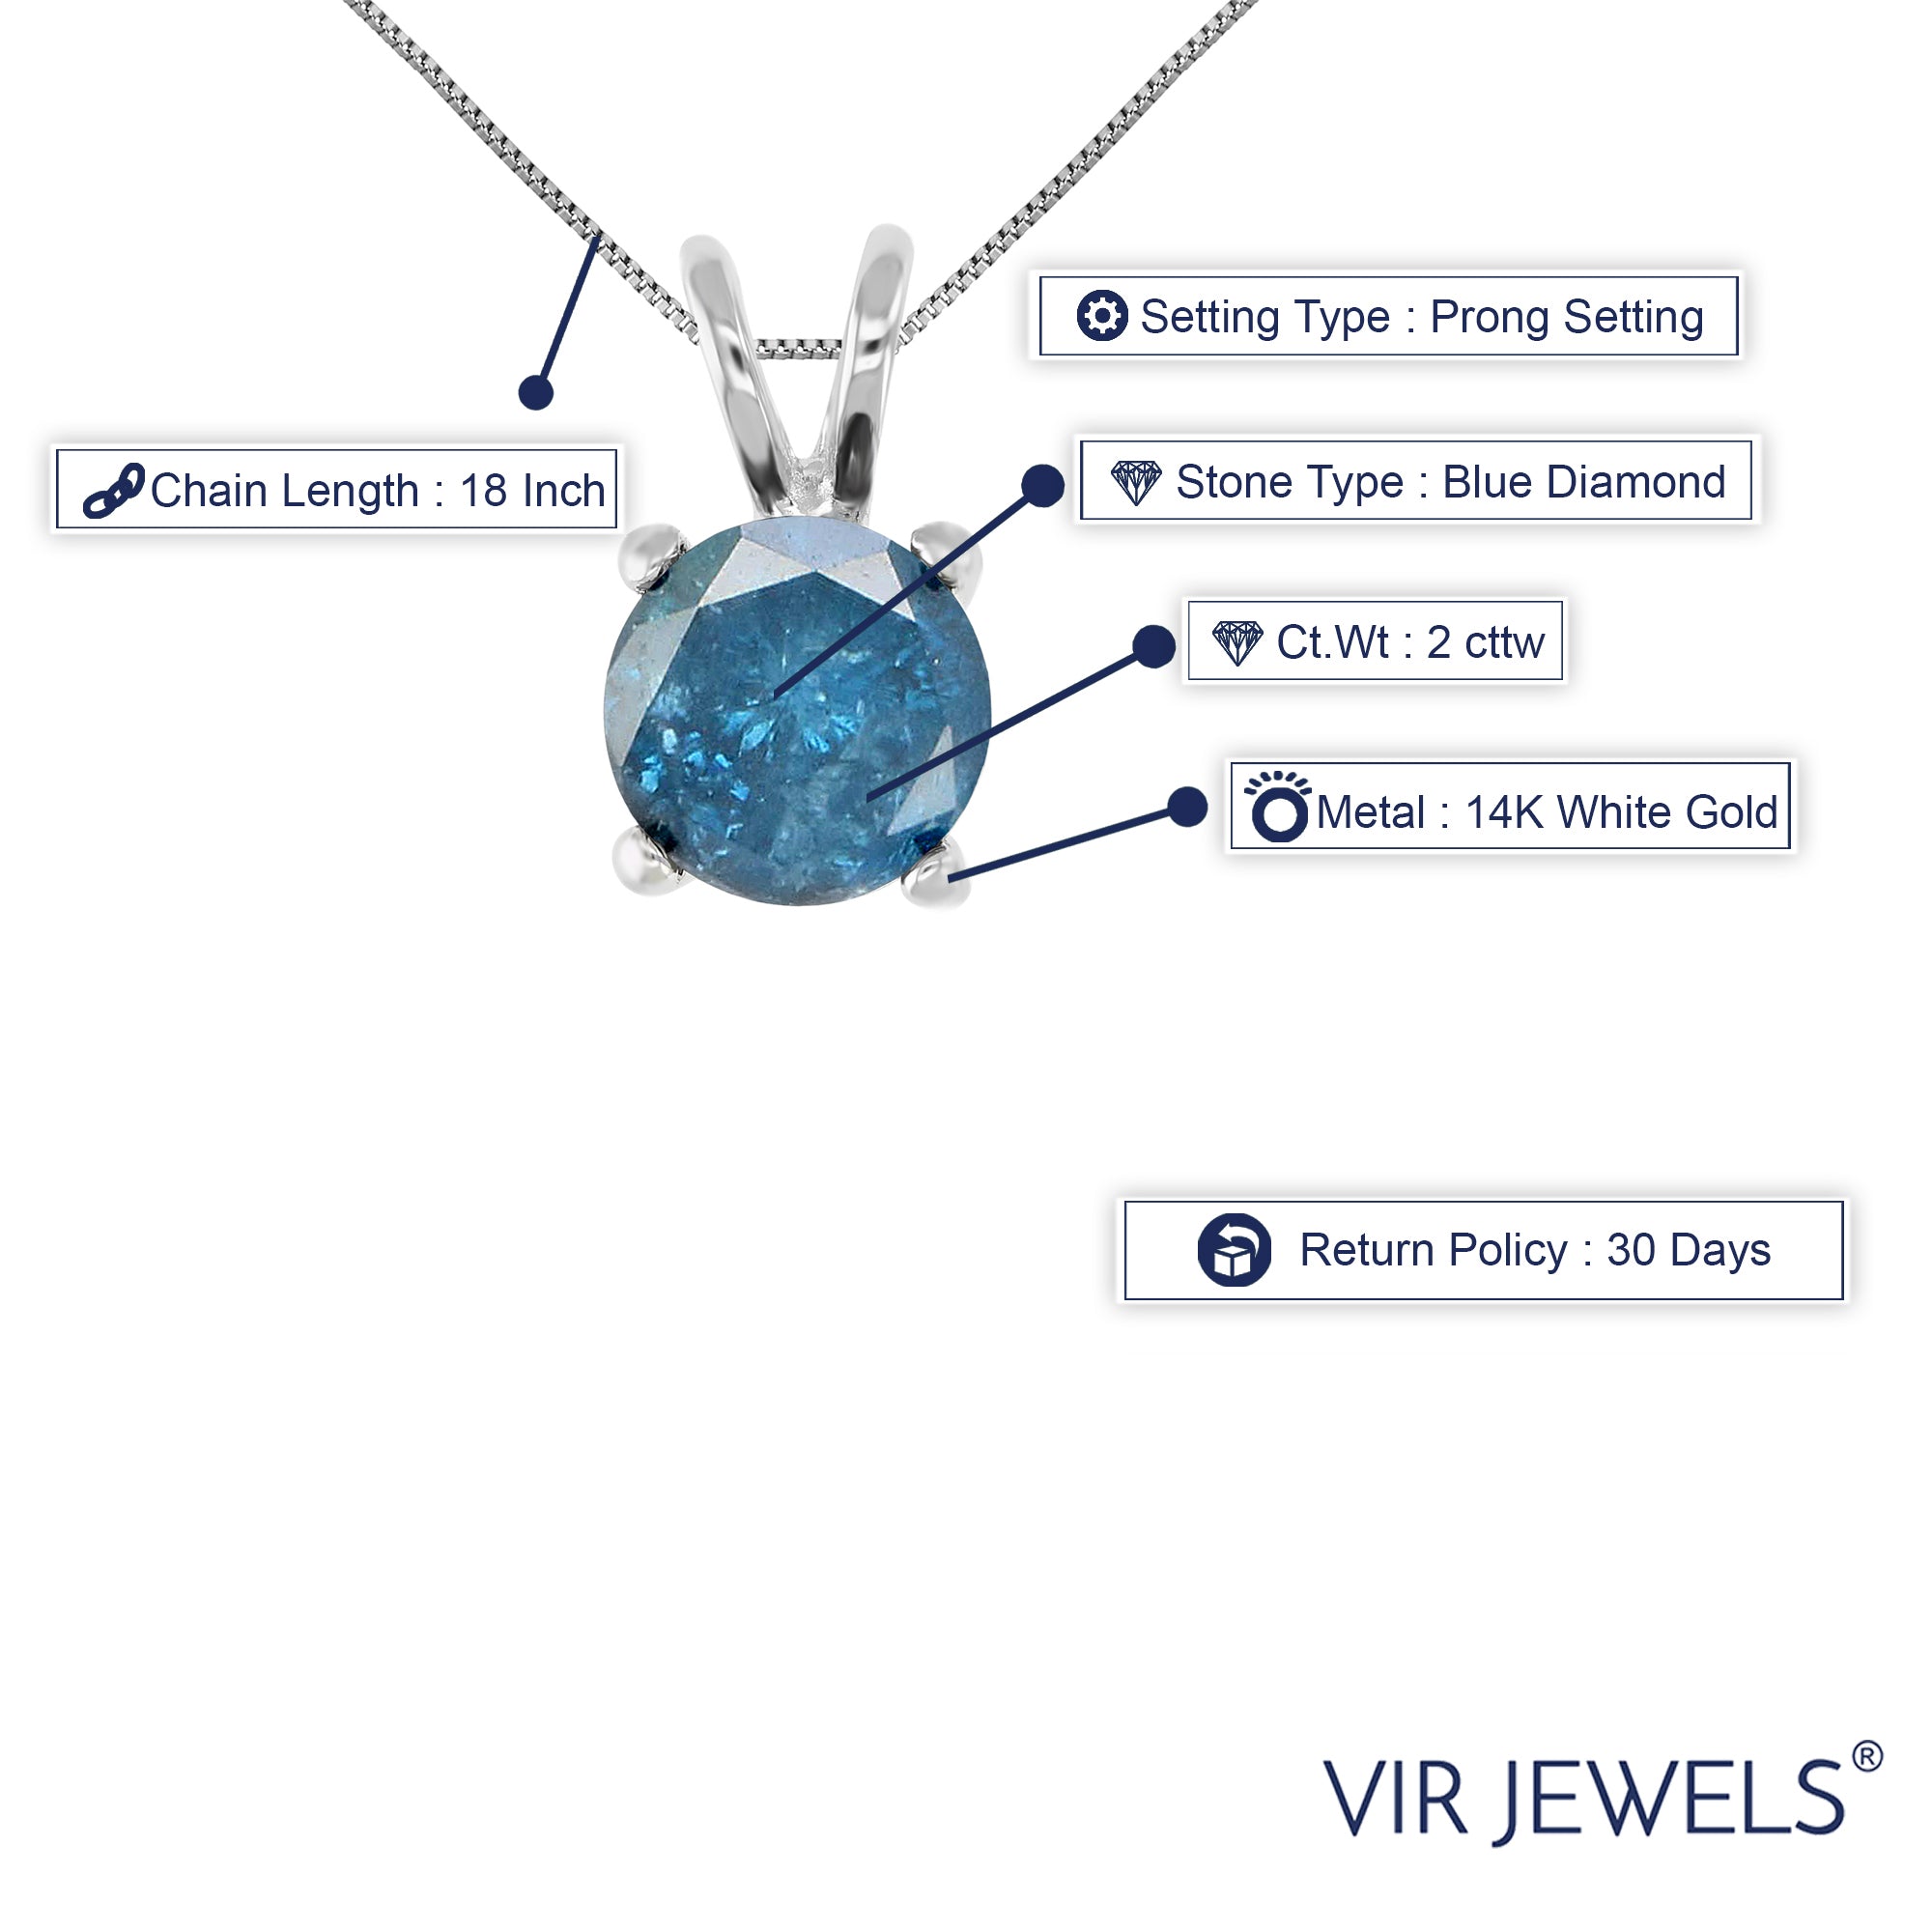 2 cttw Diamond Pendant, Blue Diamond Solitaire Pendant Necklace for Women in 14K White Gold with 18 Inch Chain, Prong Setting